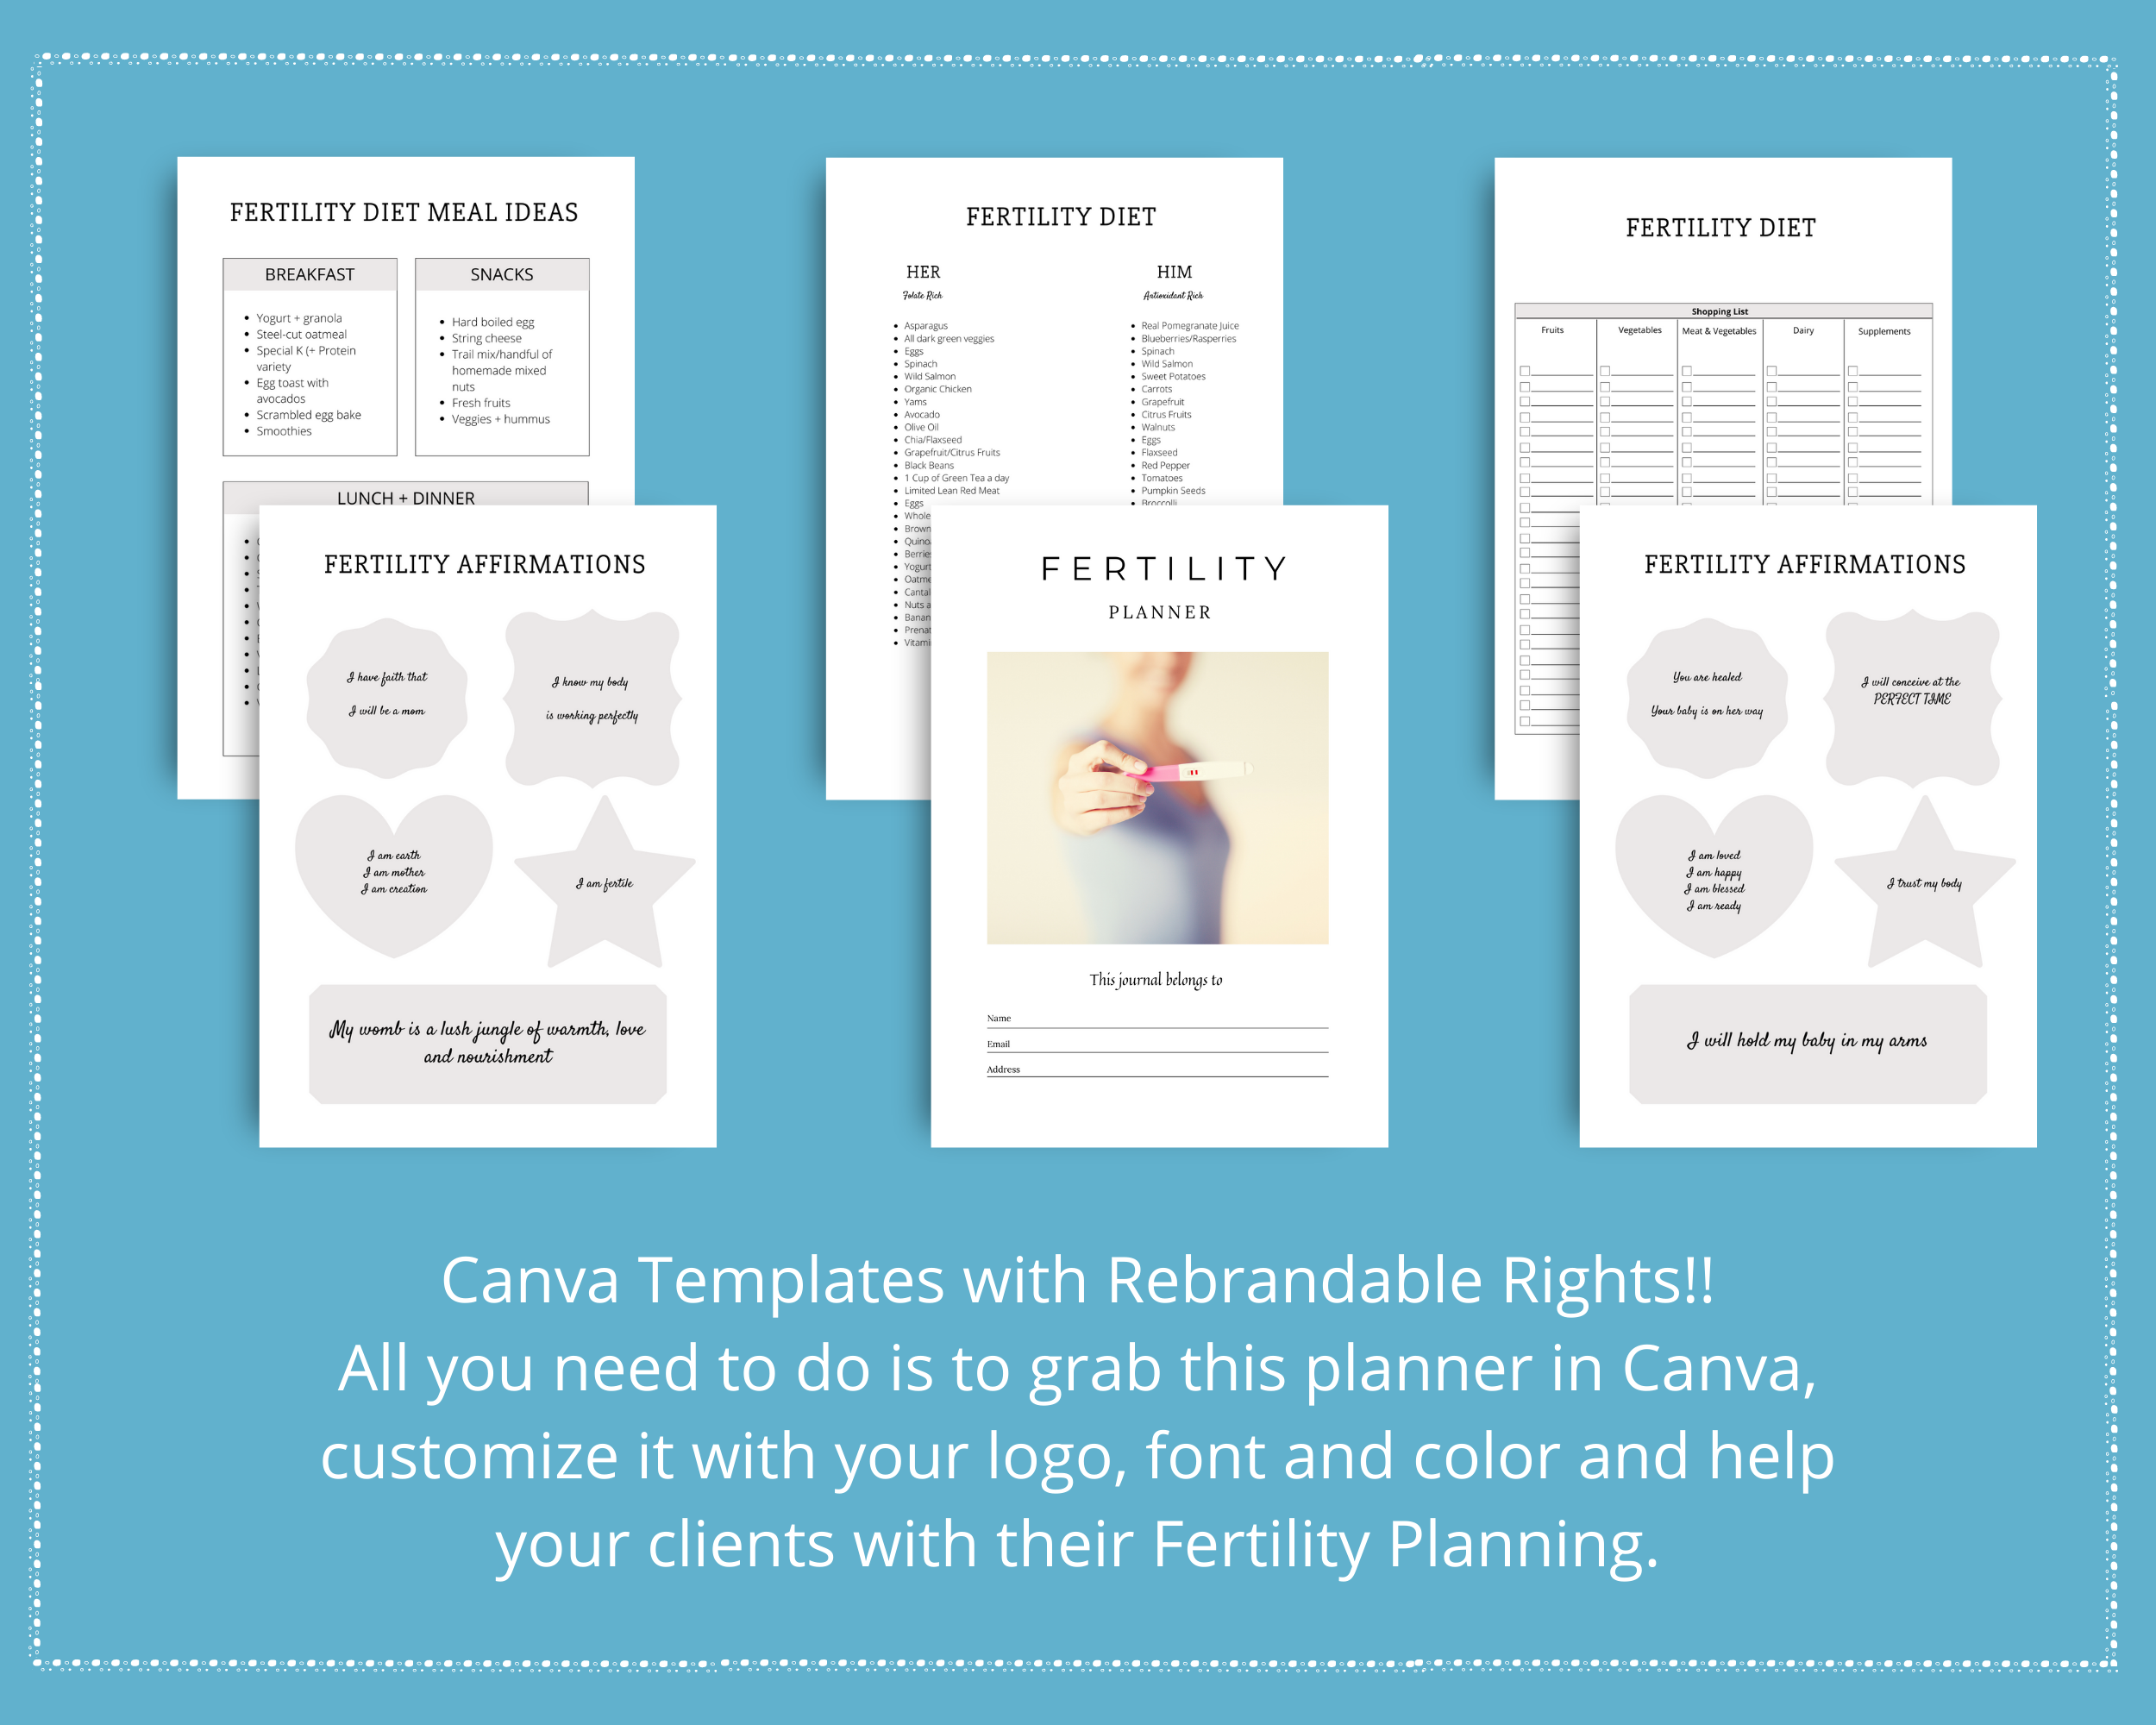 Editable Fertility Planner Templates in Canva | Commercial Use